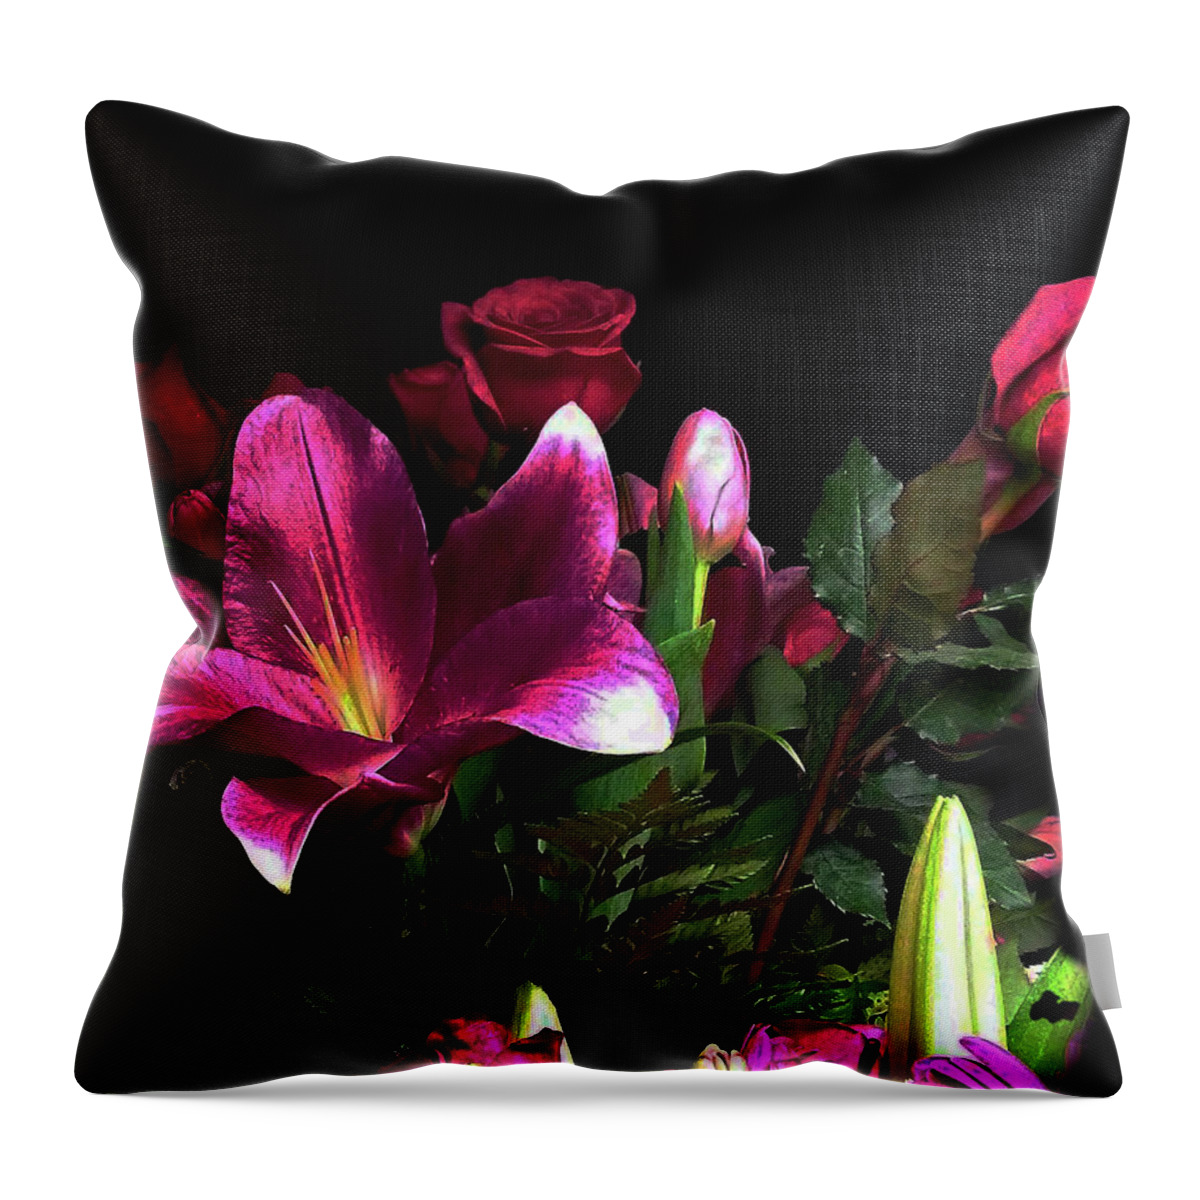 Rose Throw Pillow featuring the photograph Romantic Roses by Andrew Lawrence